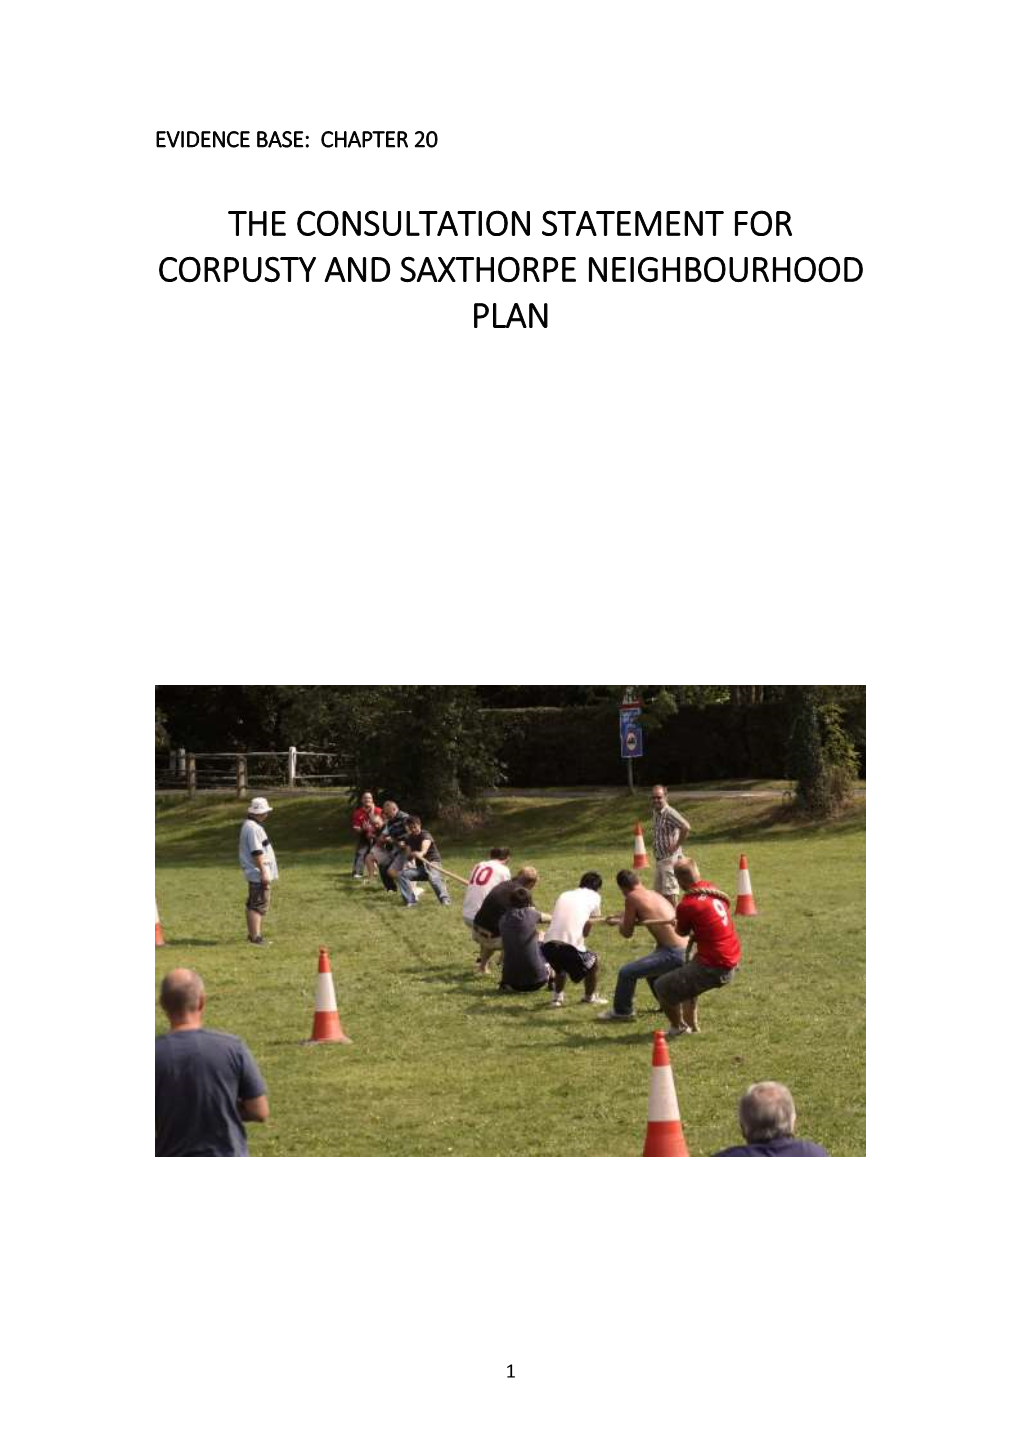 The Consultation Statement for Corpusty and Saxthorpe Neighbourhood Plan